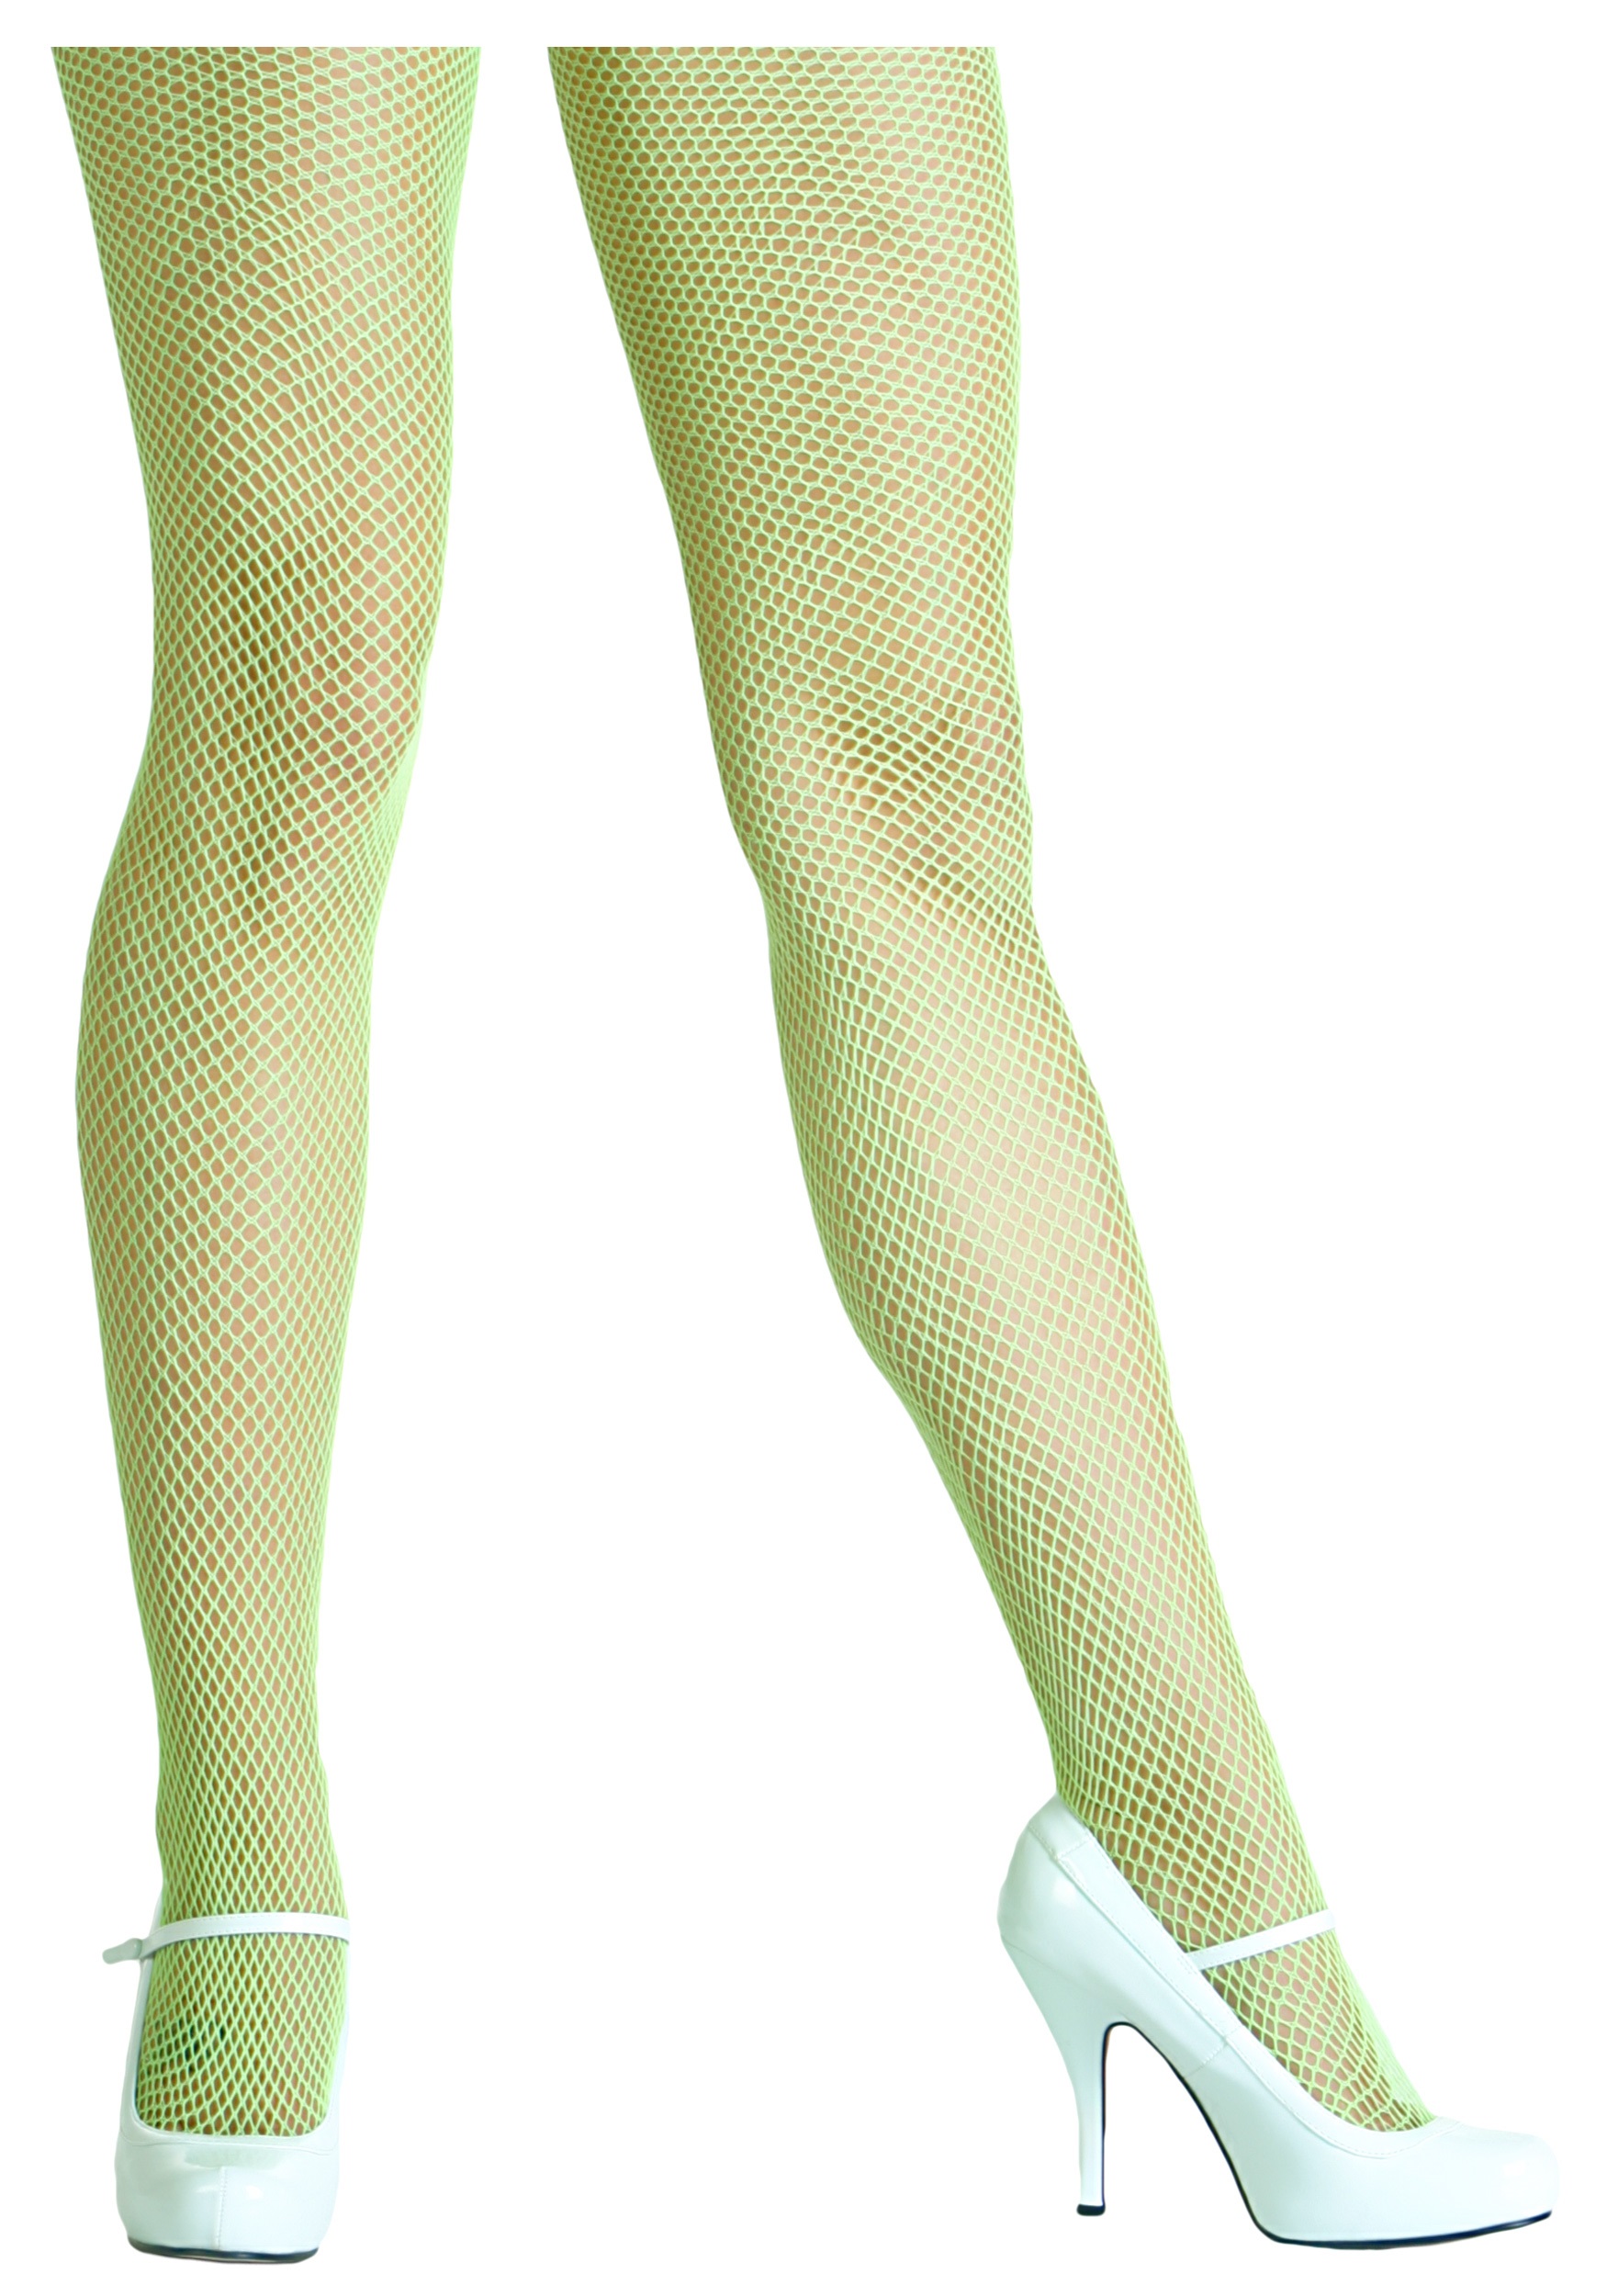 Neon Sexy Fishnet Tights Women Stockings Party Club Wear Pantyhose Women  Green Carnival Fish Net Stockings Female Tight Meias - Tights - AliExpress